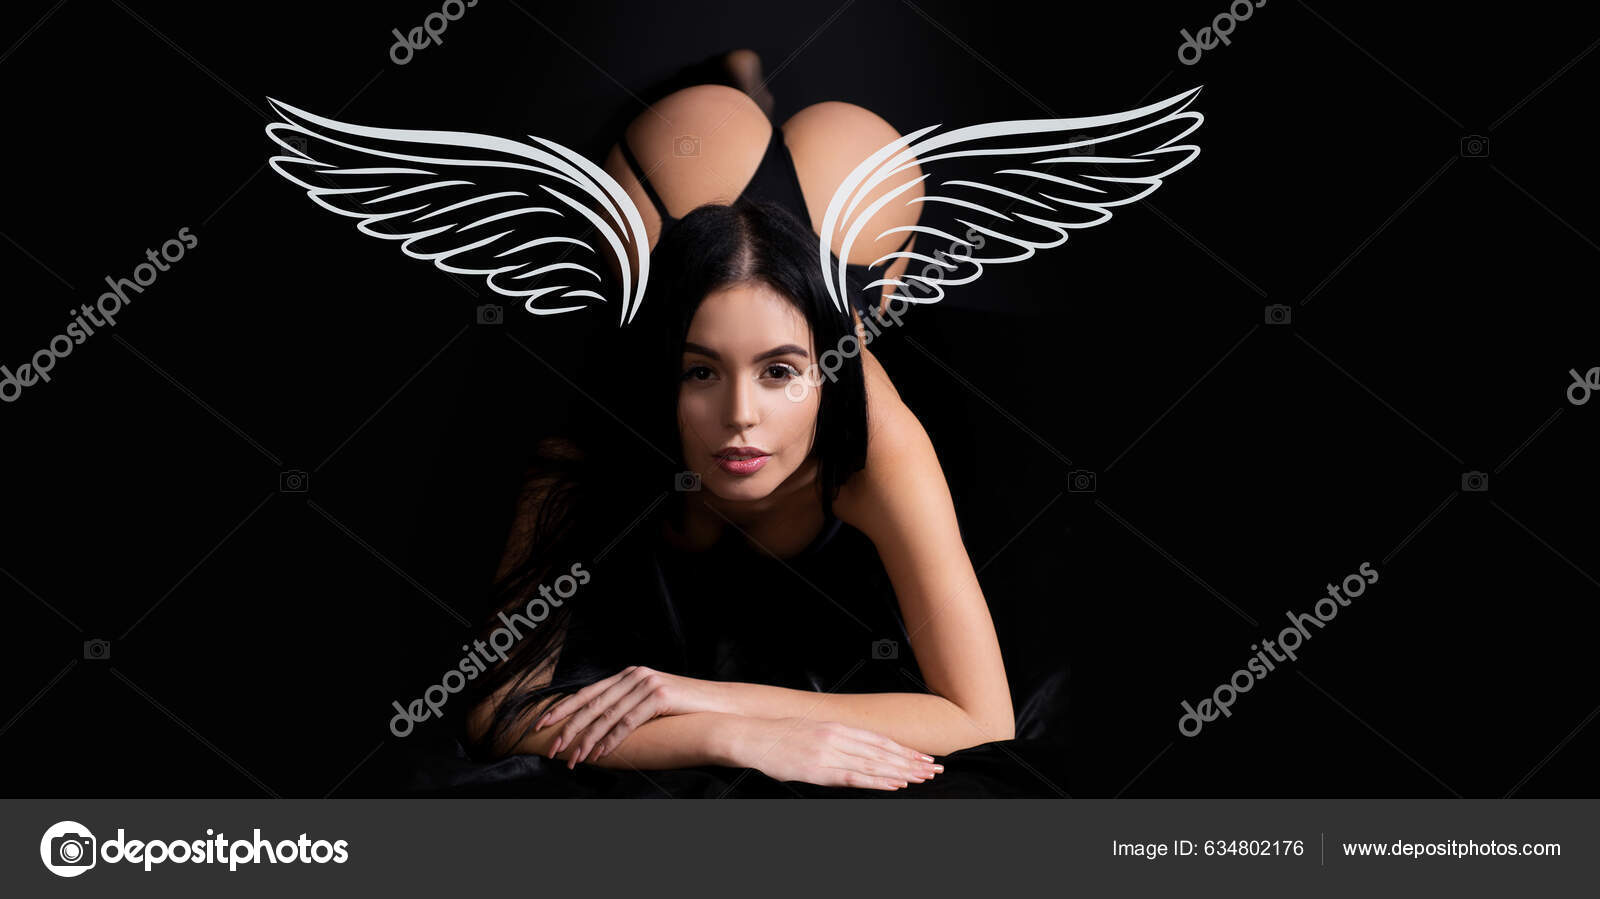 Angel sexy Stock Photos, Royalty Free Angel sexy Images | Depositphotos